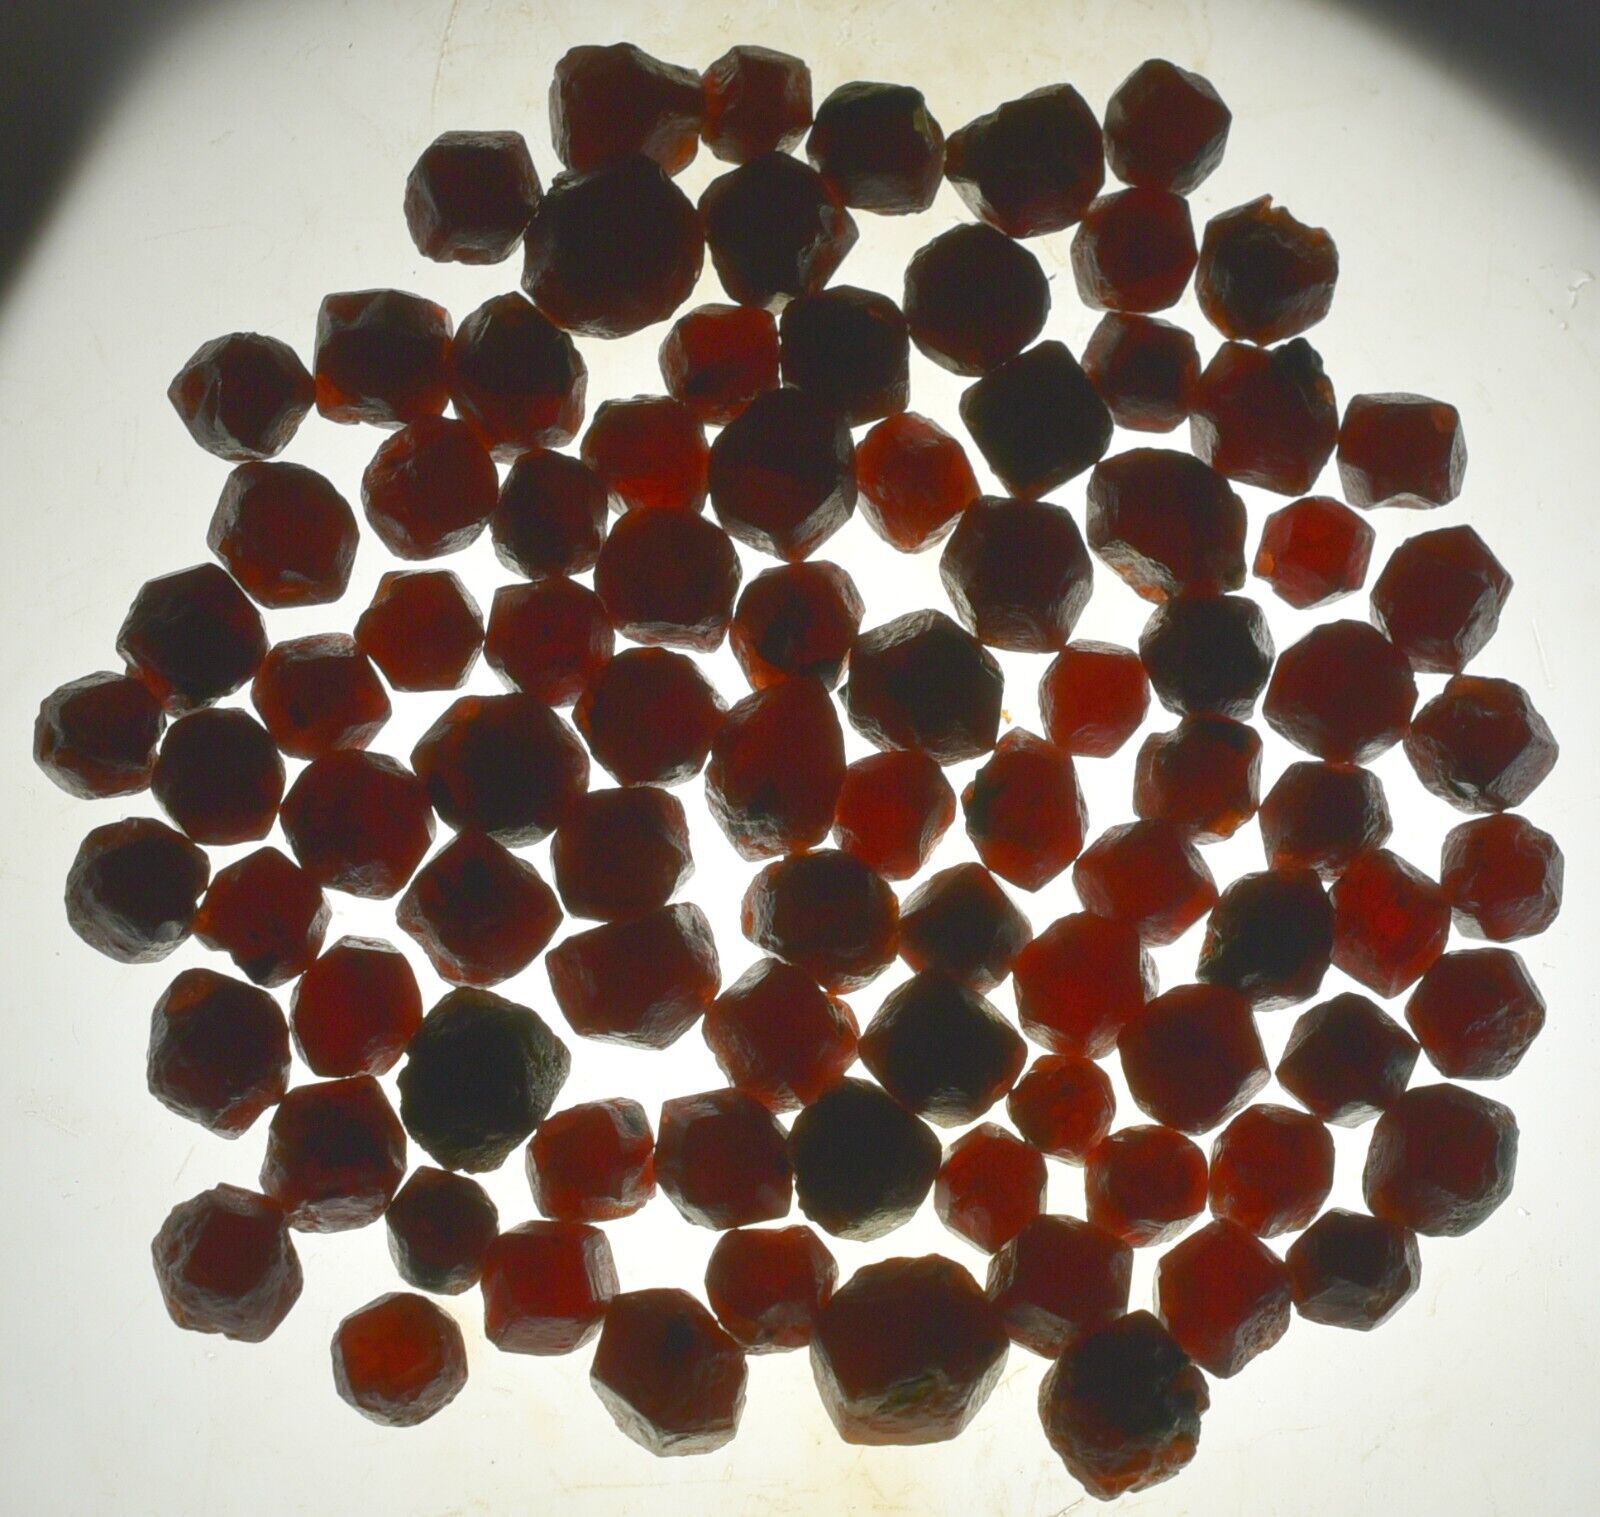 400GM Full Terminated Natural Red Almandine Garnet Crystals Lot From Afghanistan